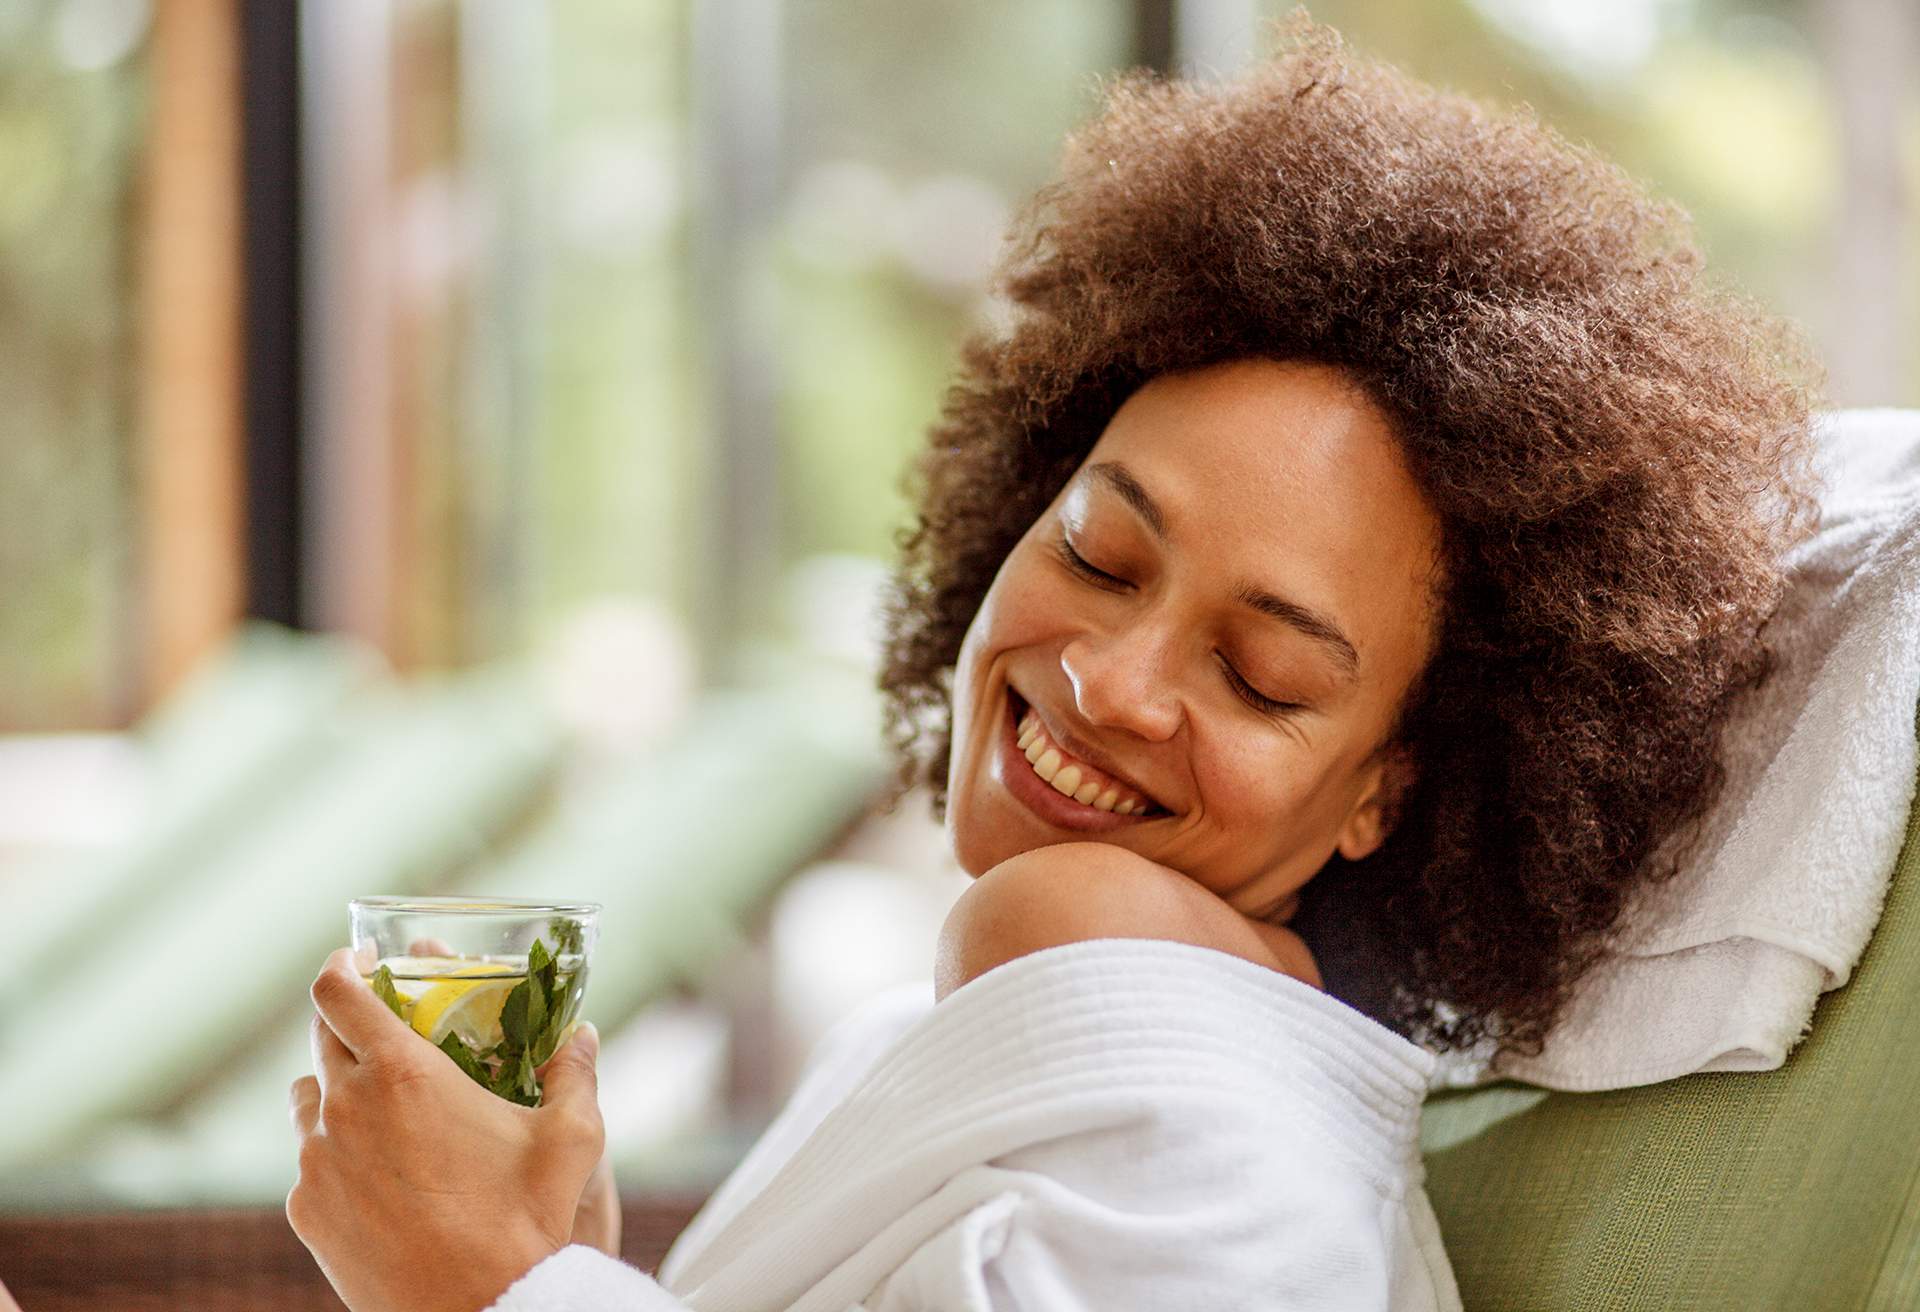 wellness_spa_person_woman-drinking-tea_gettyimages-1160297031-copy